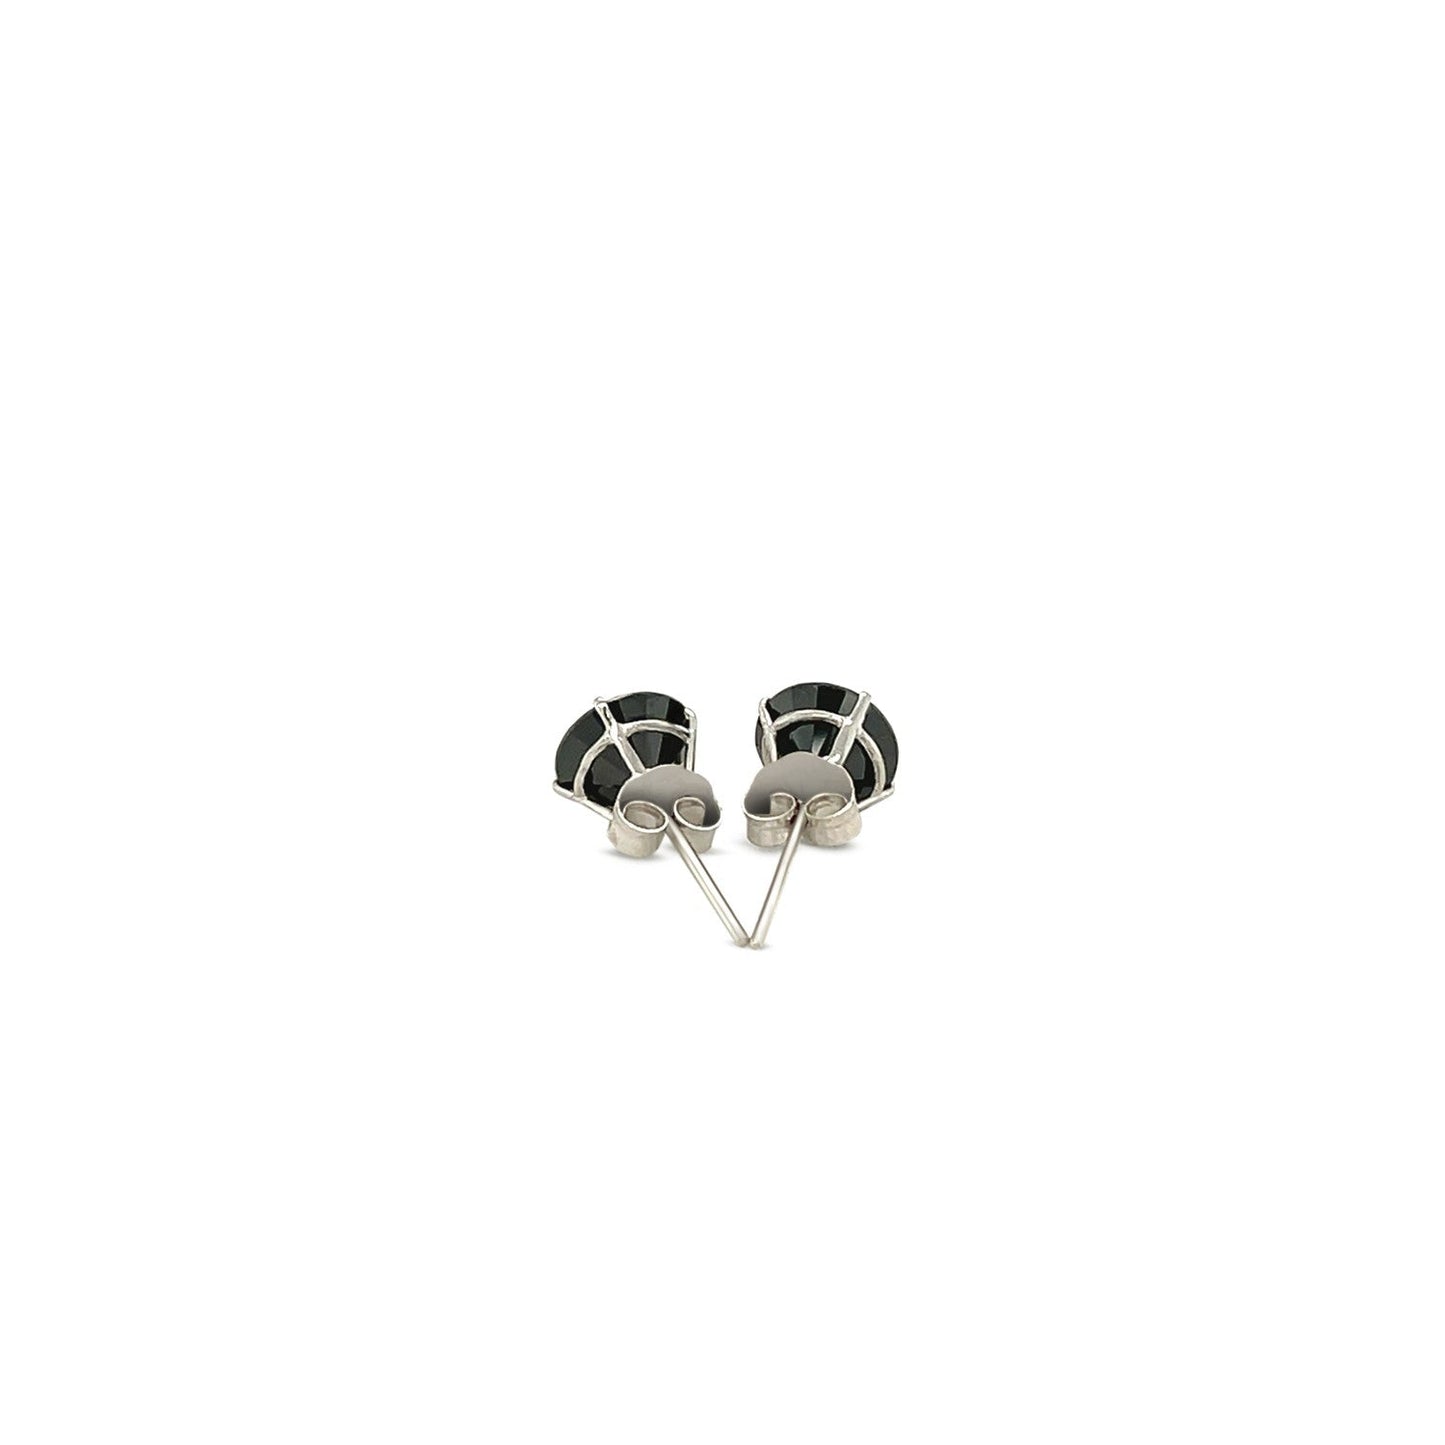 14k White Gold Stud Earrings with Black 6mm Faceted Cubic Zirconia-2